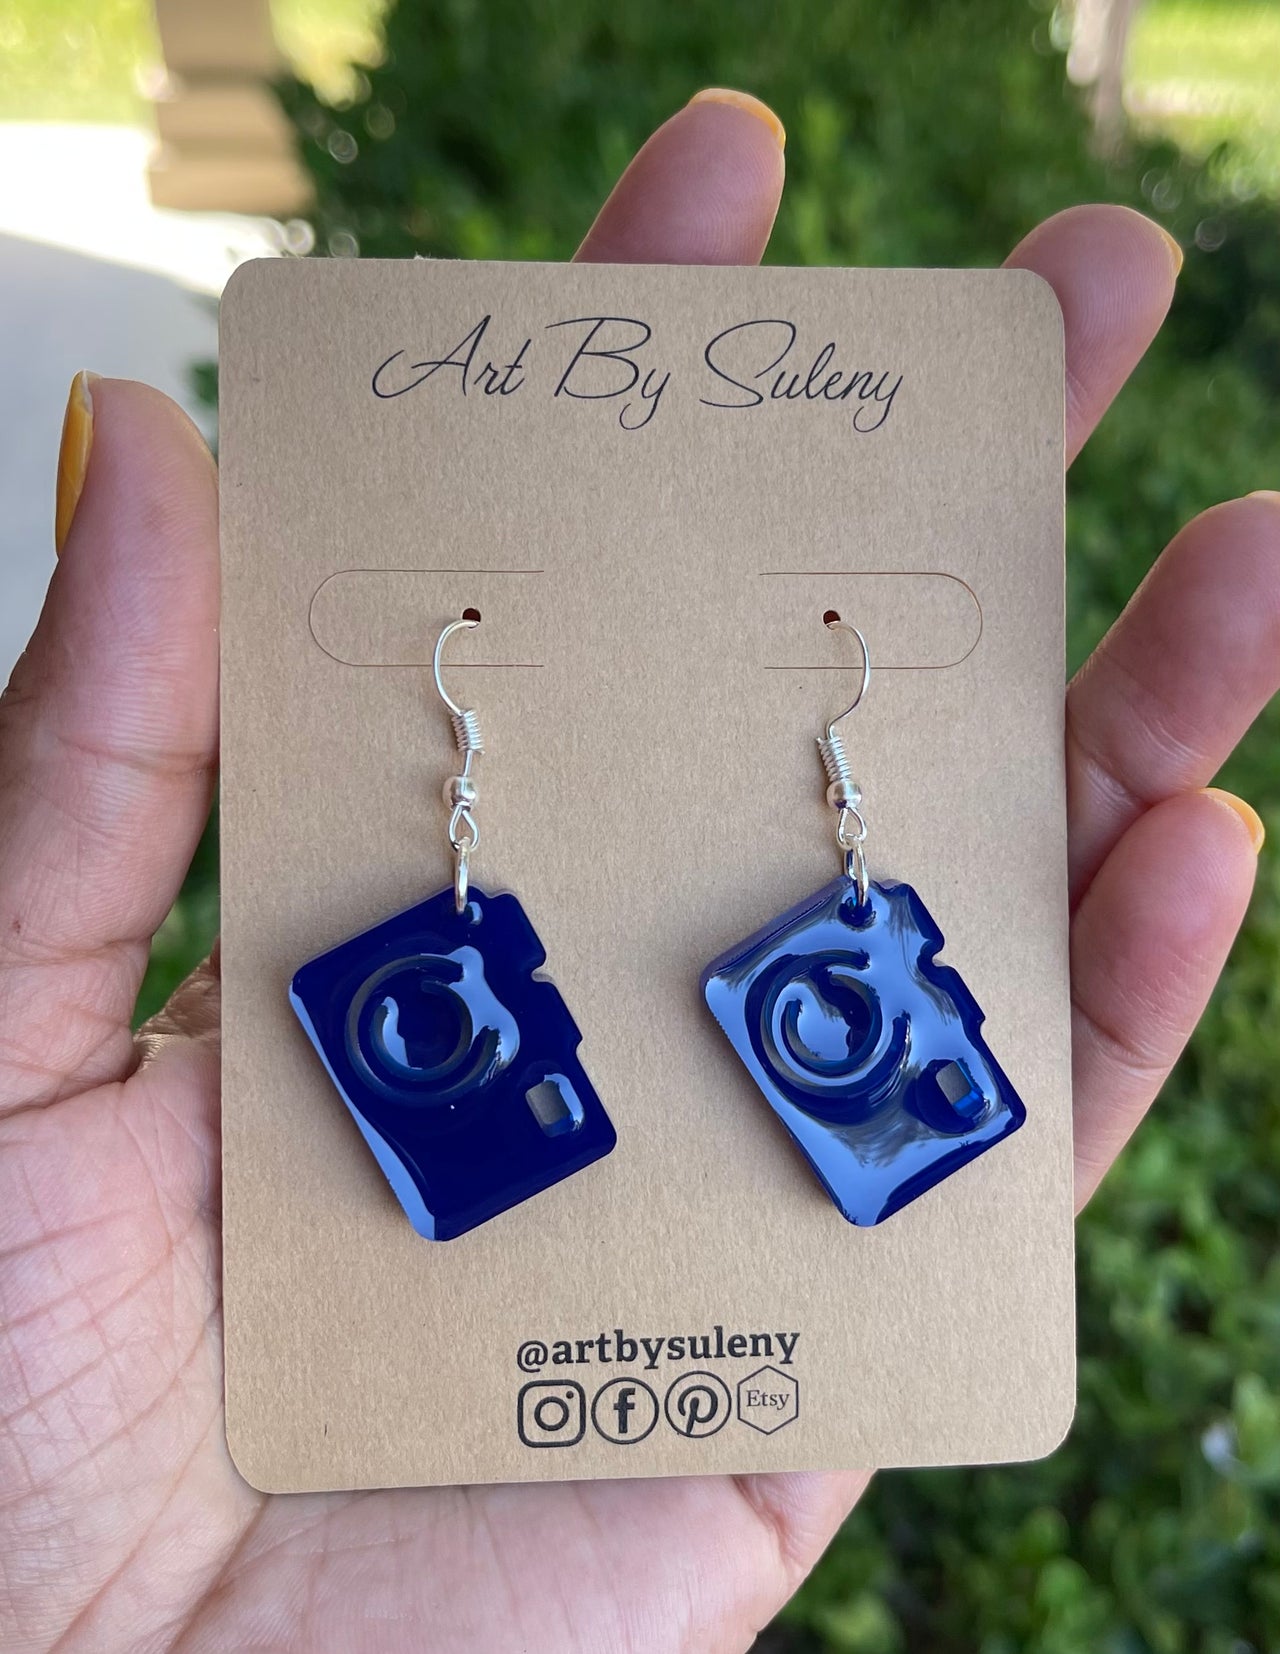 Camera Dangle Earrings made with Resin